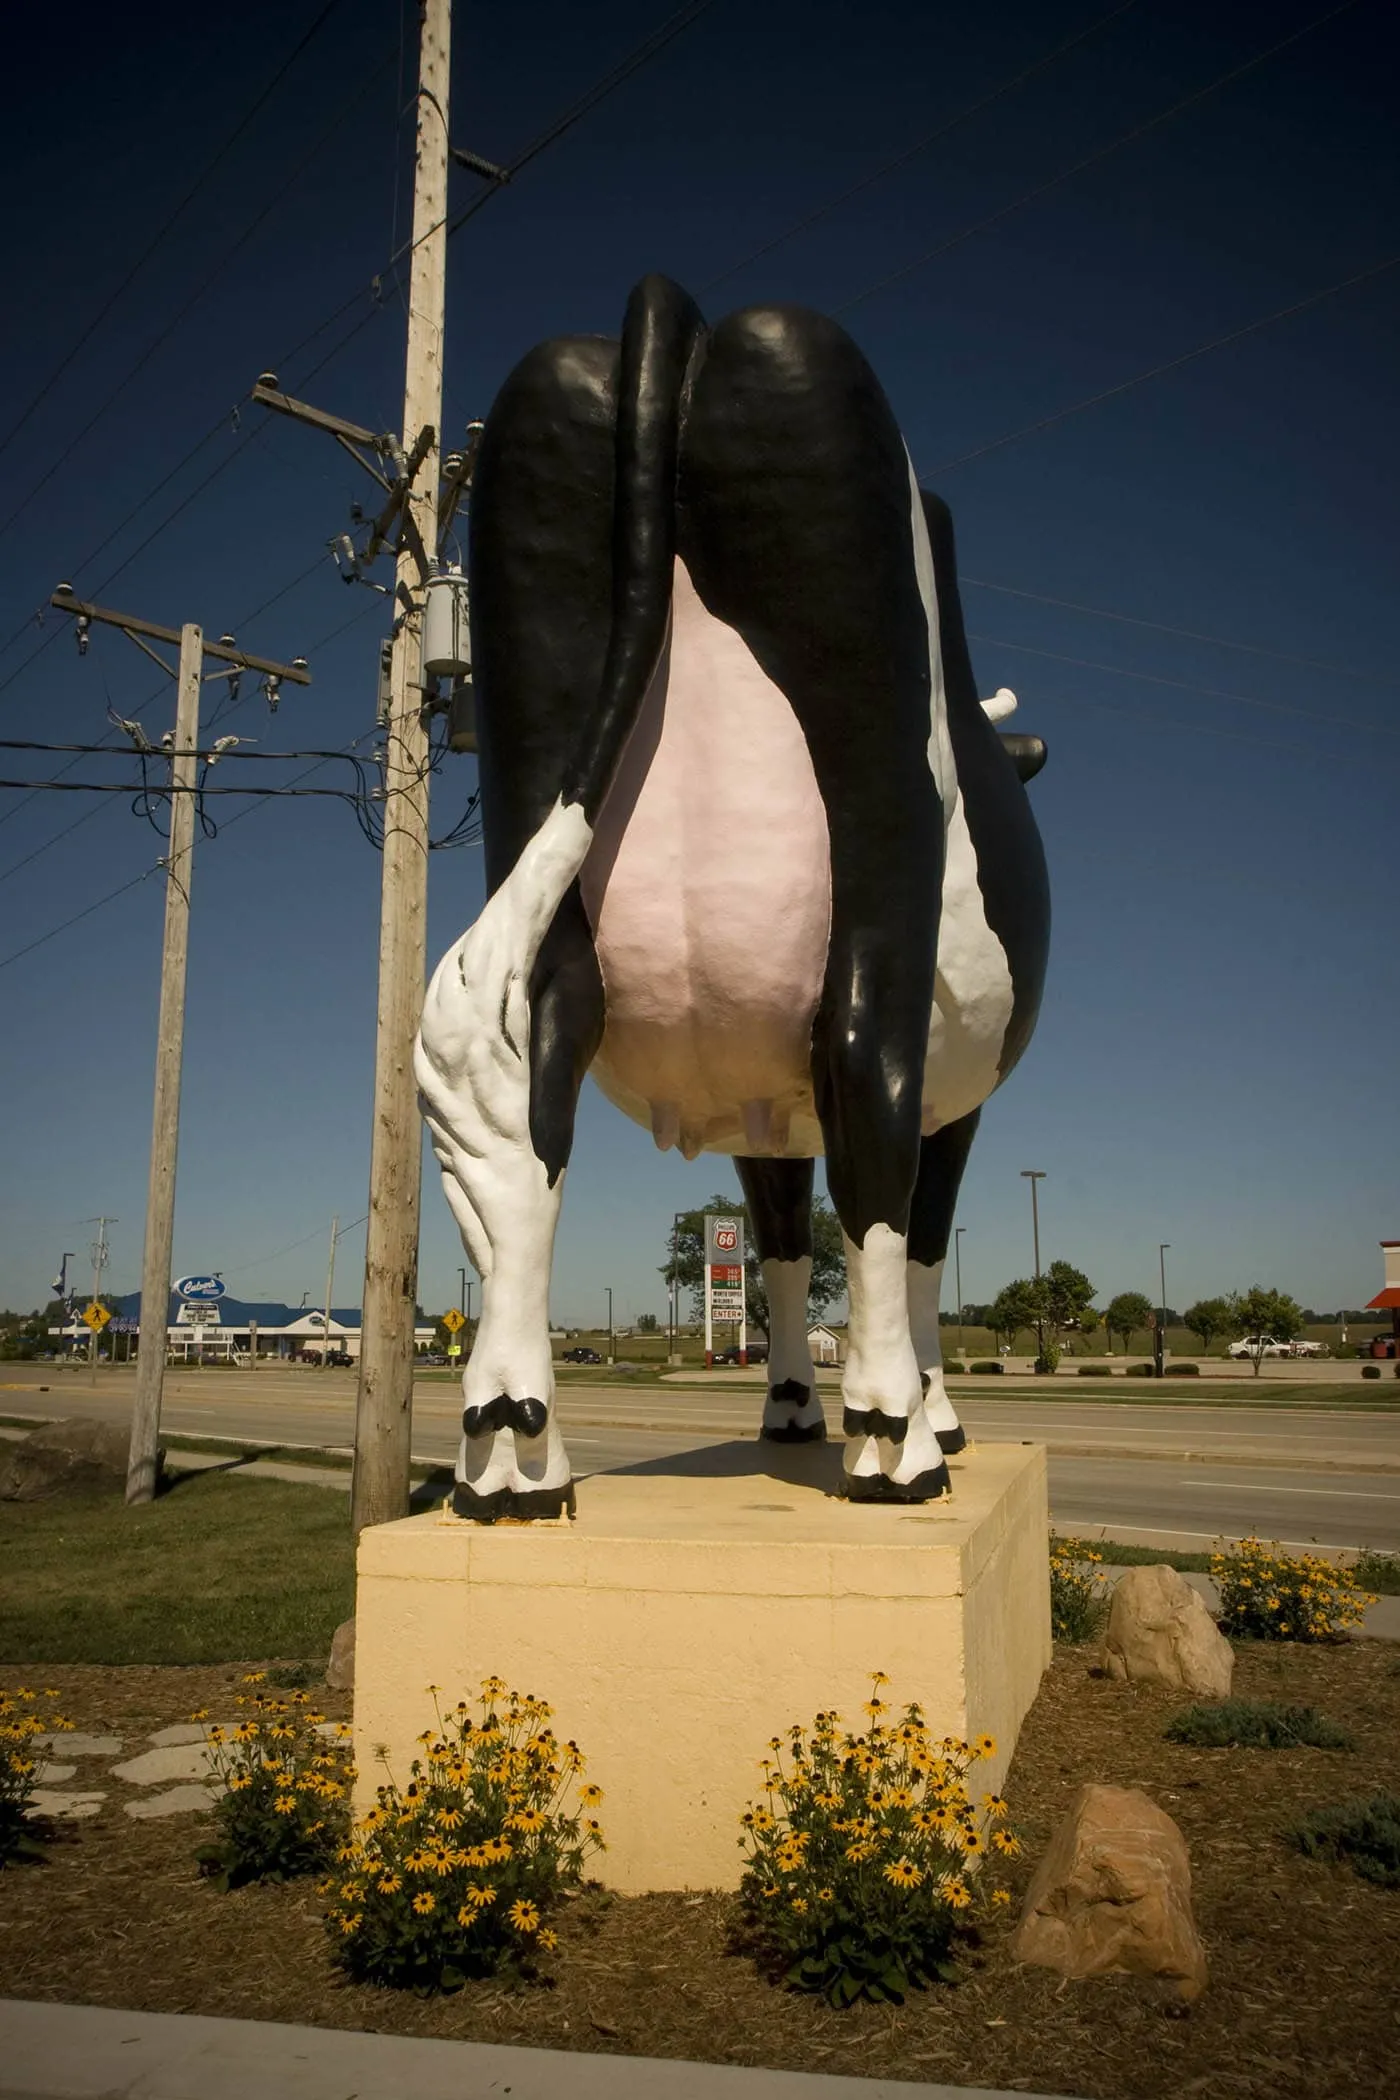 Sissy the Cow - a giant fiberglass cow - in DeForest, Wisconsin